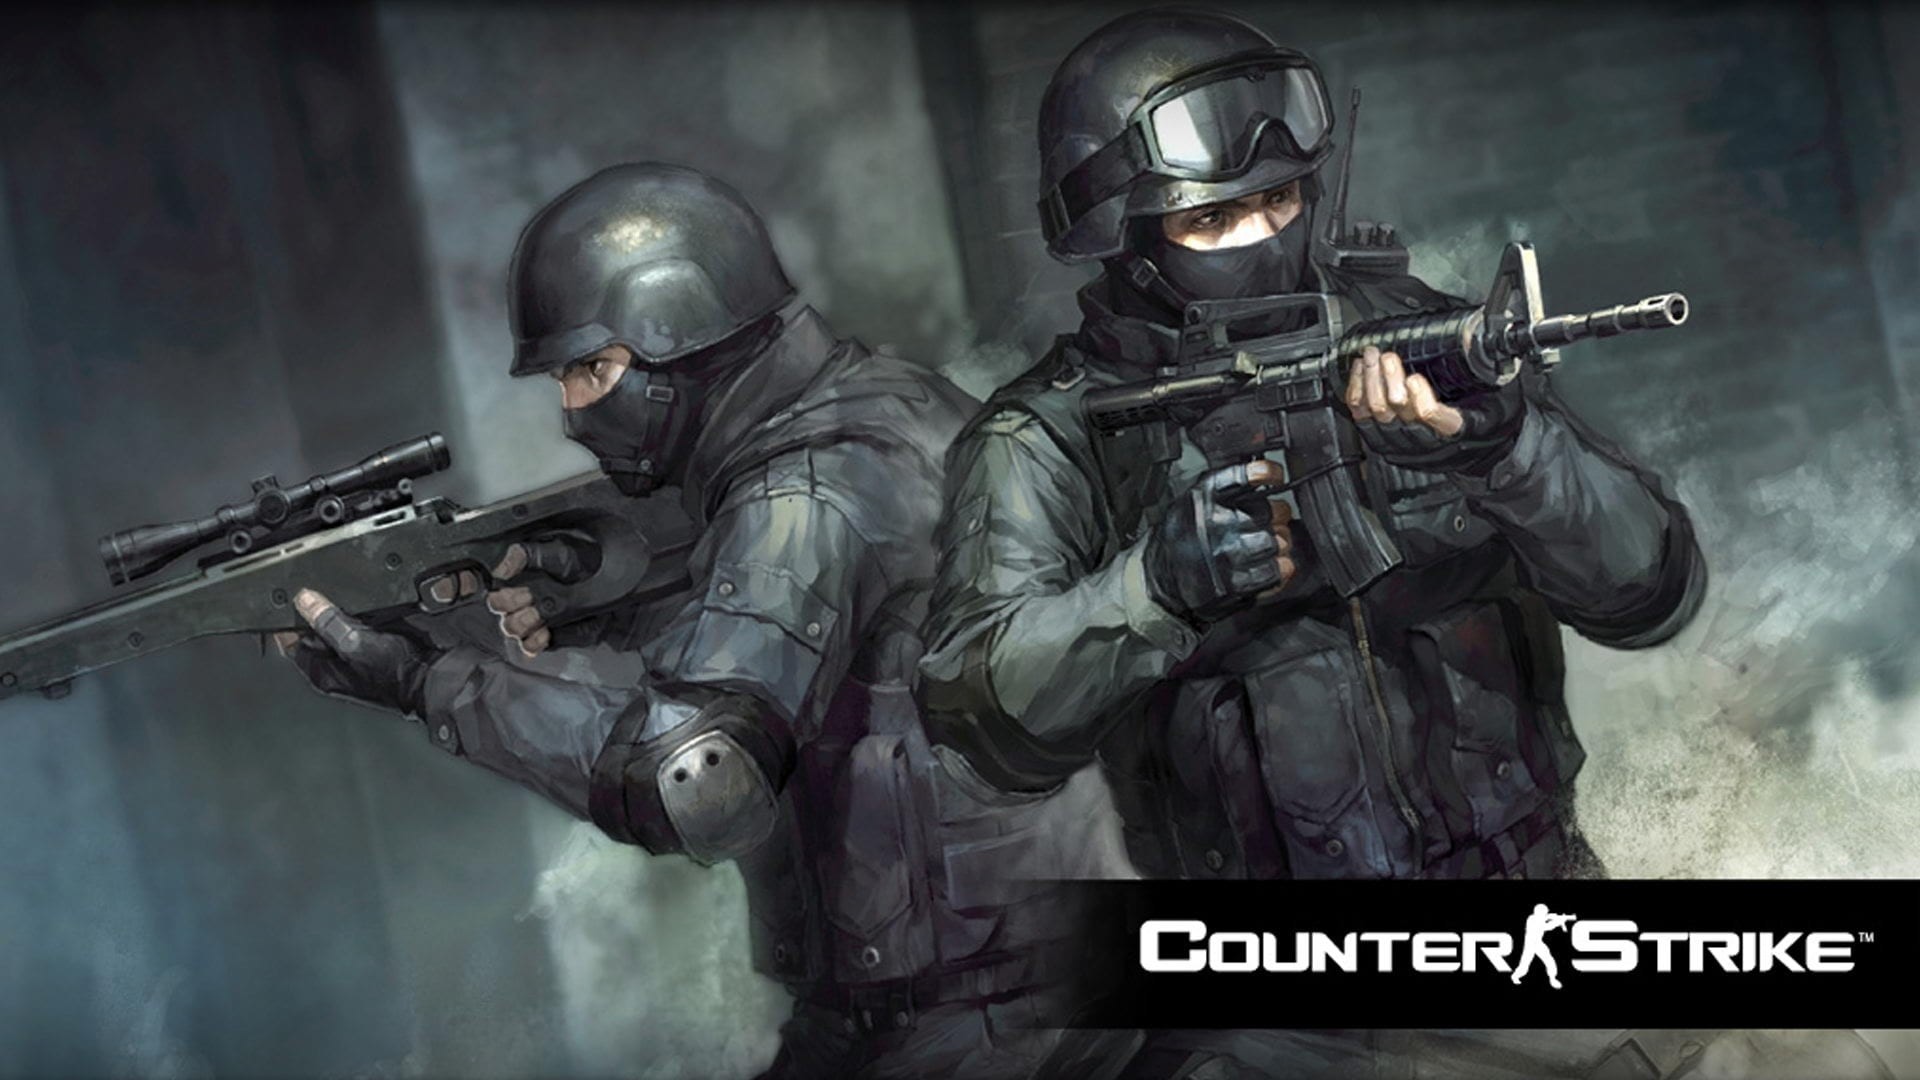 1920x1080 Counter-Strike 1.6 Wallpapers hd